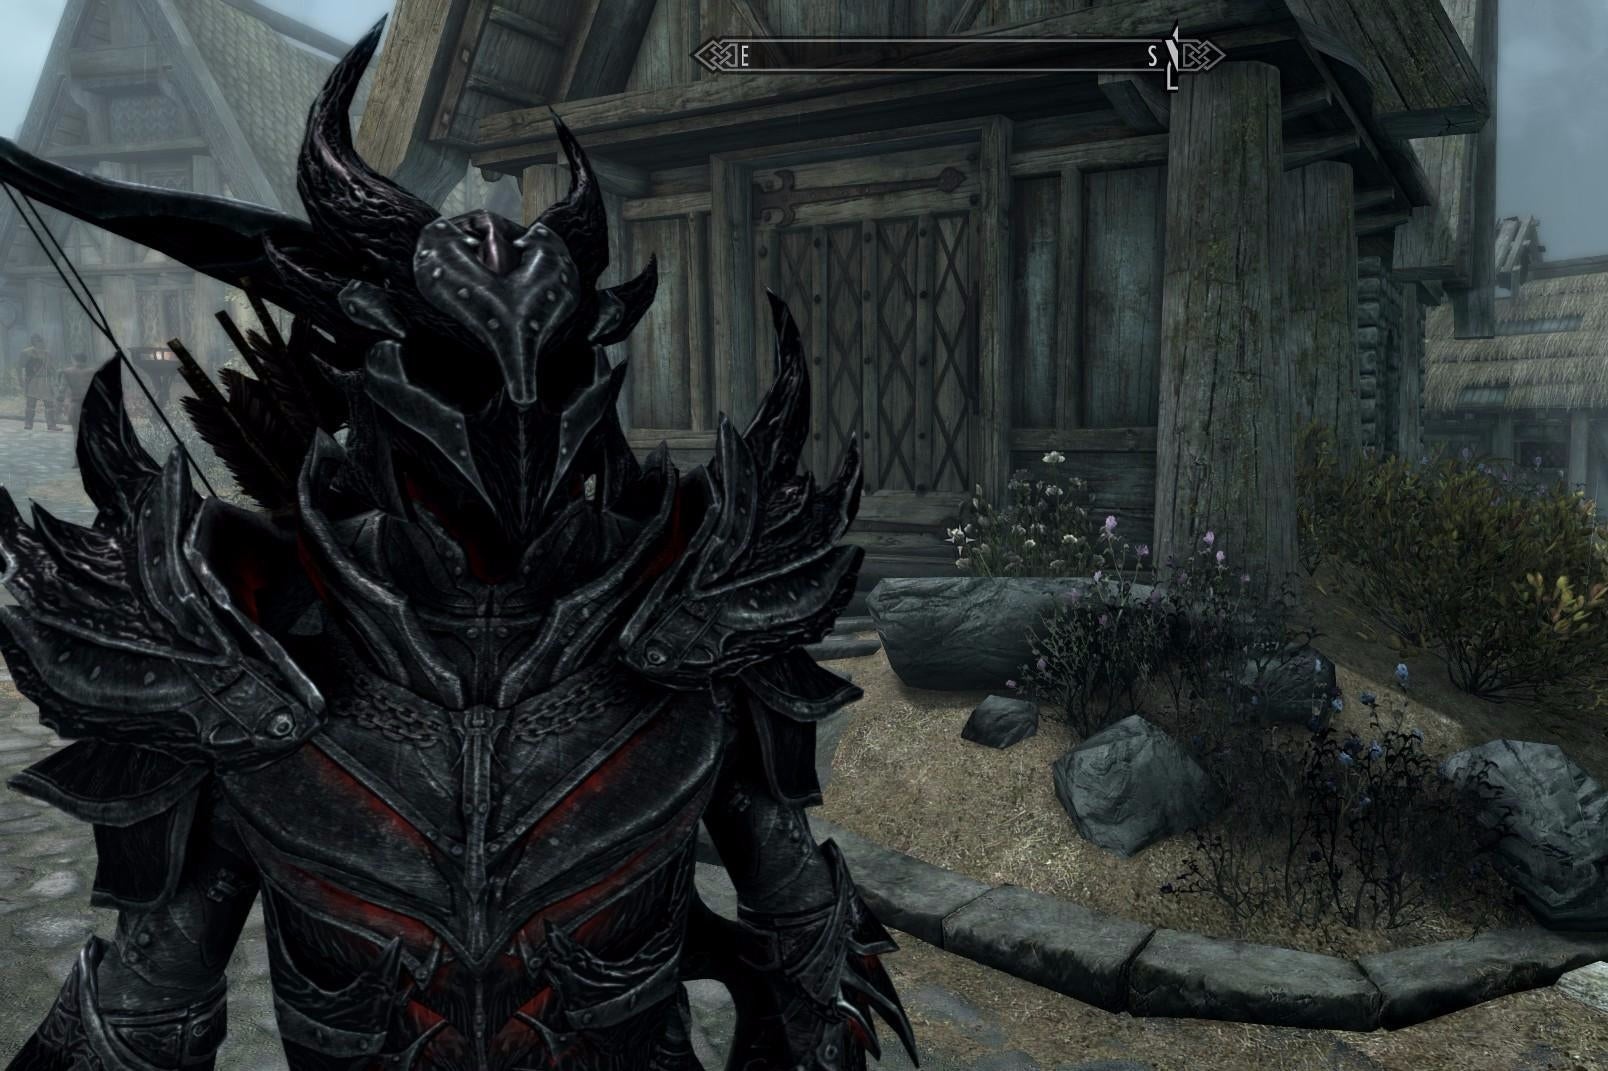 Image for Skyrim best armor ranked - highest defense Heavy Armor, Light Armor, Shields and their locations